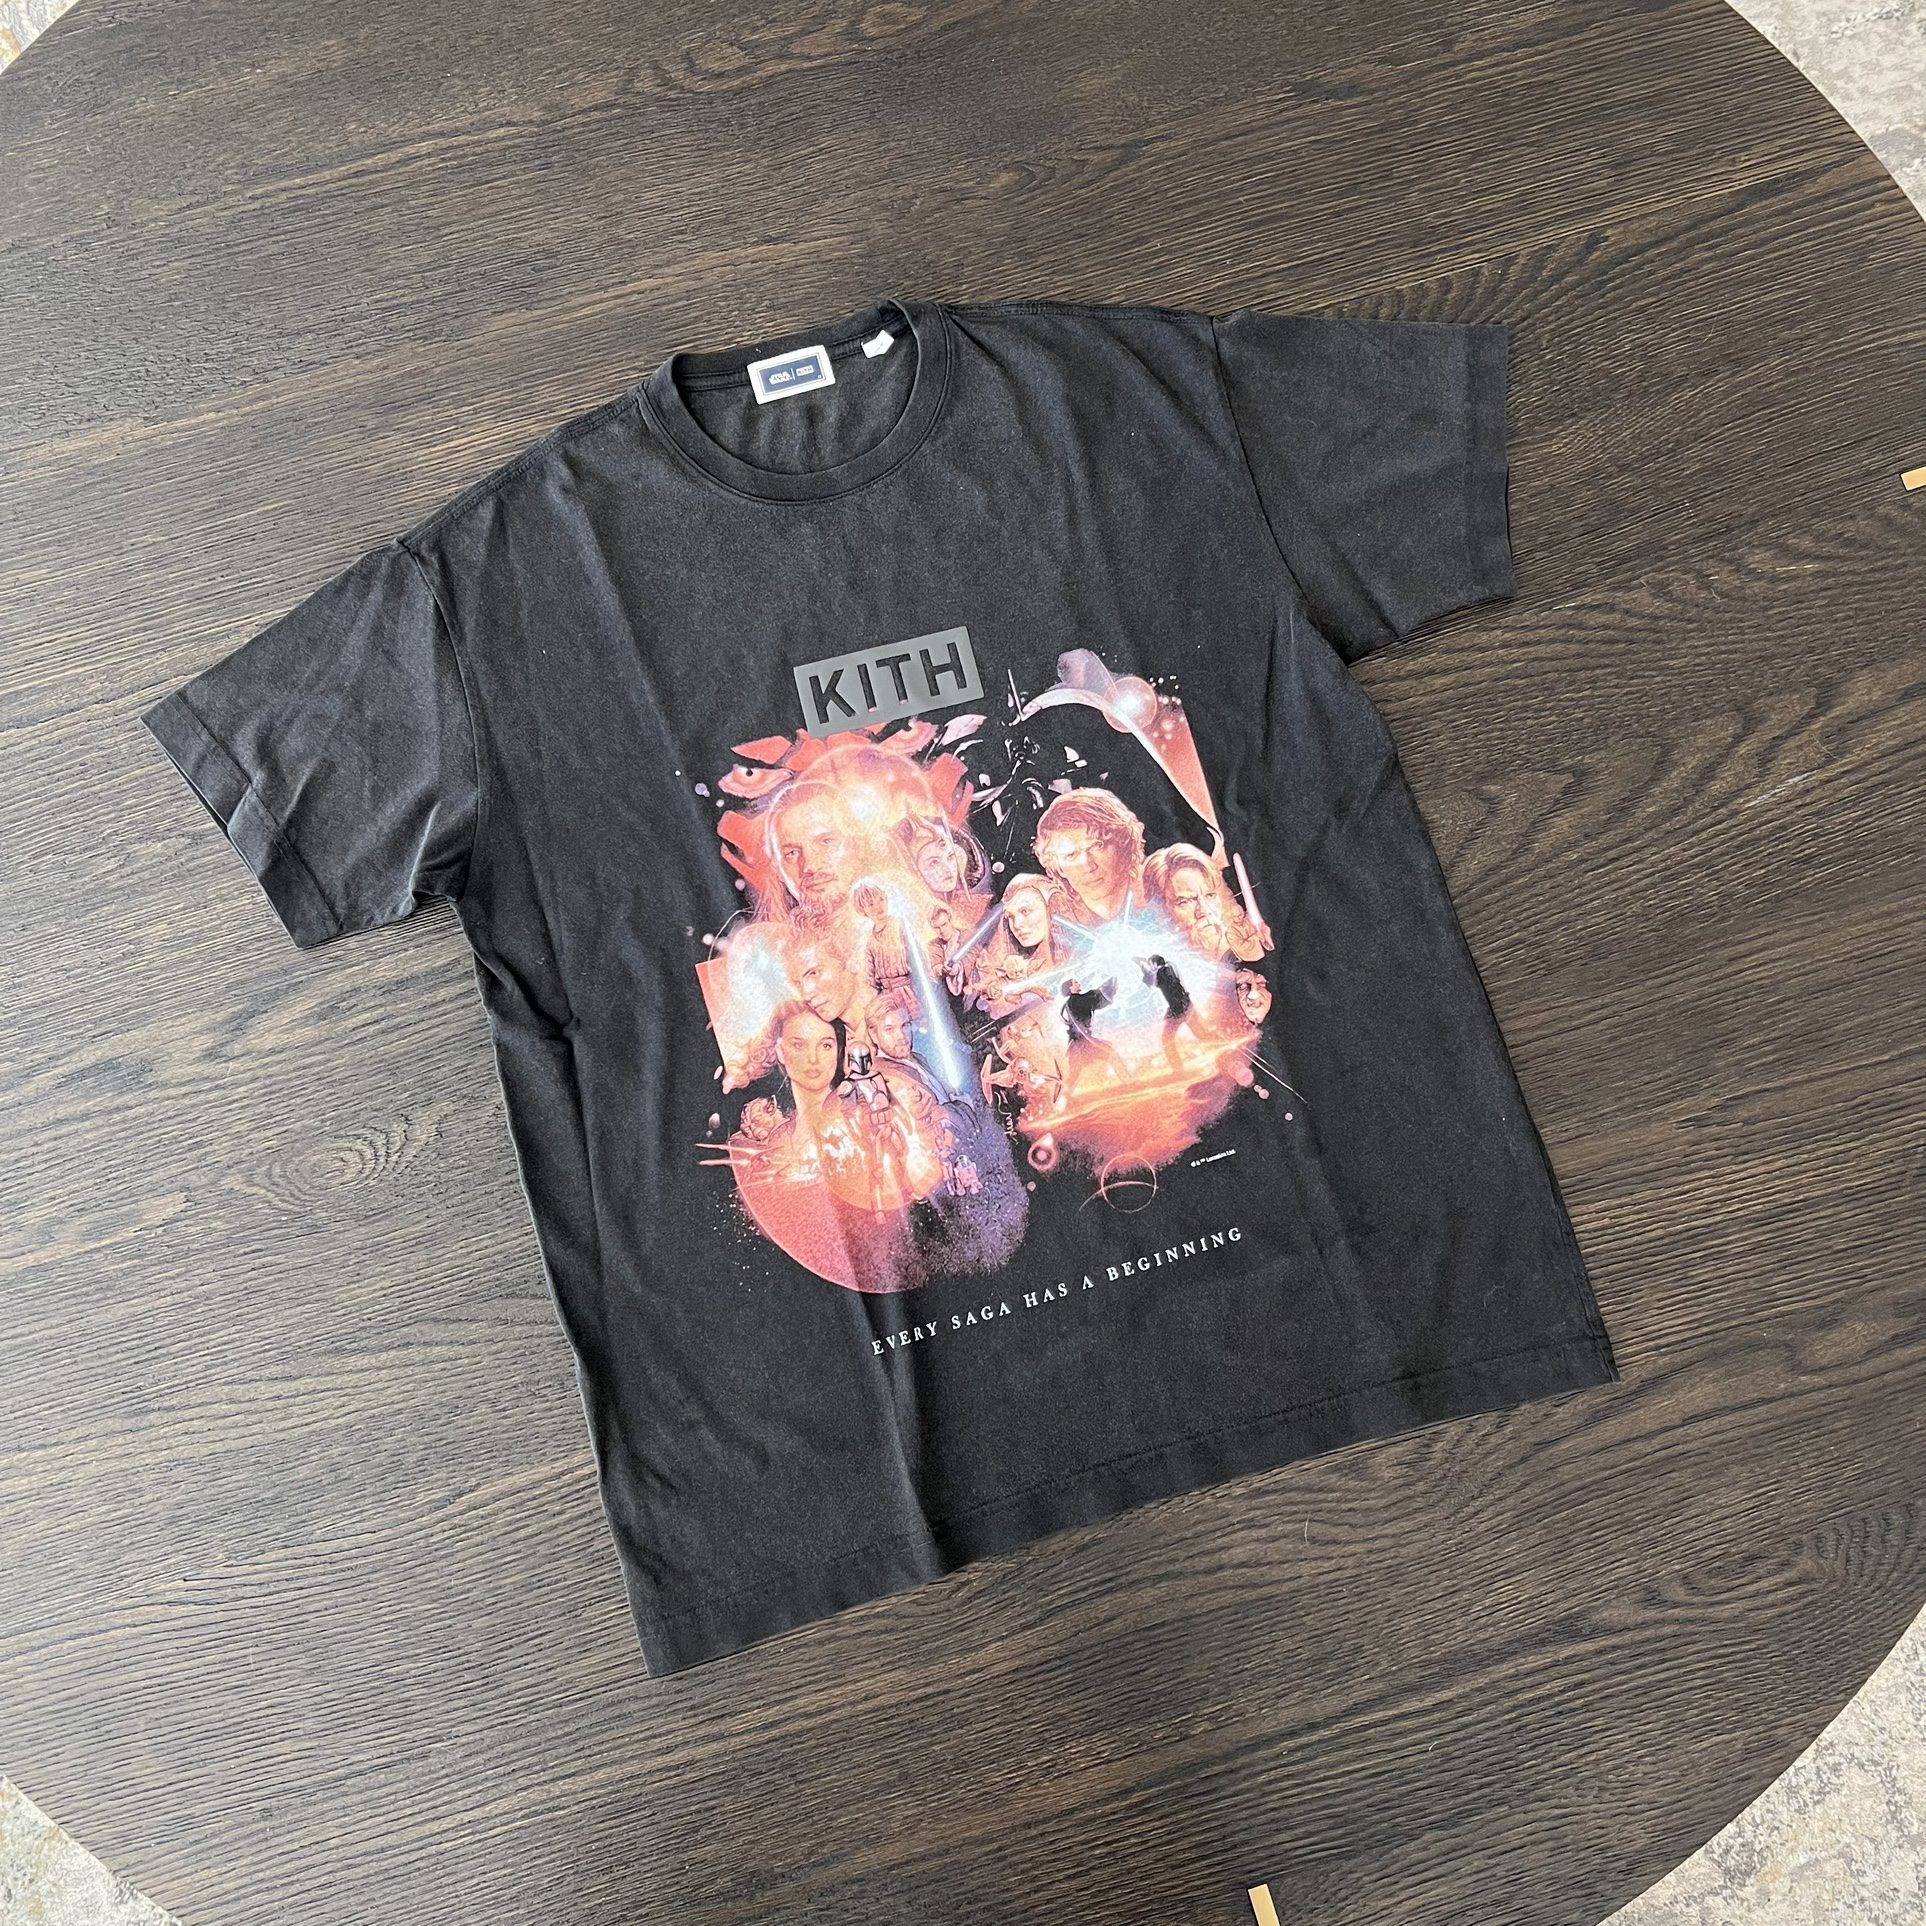 Size XL - Kith x Star Wars Beginning Vintage Tee Black for Sale in